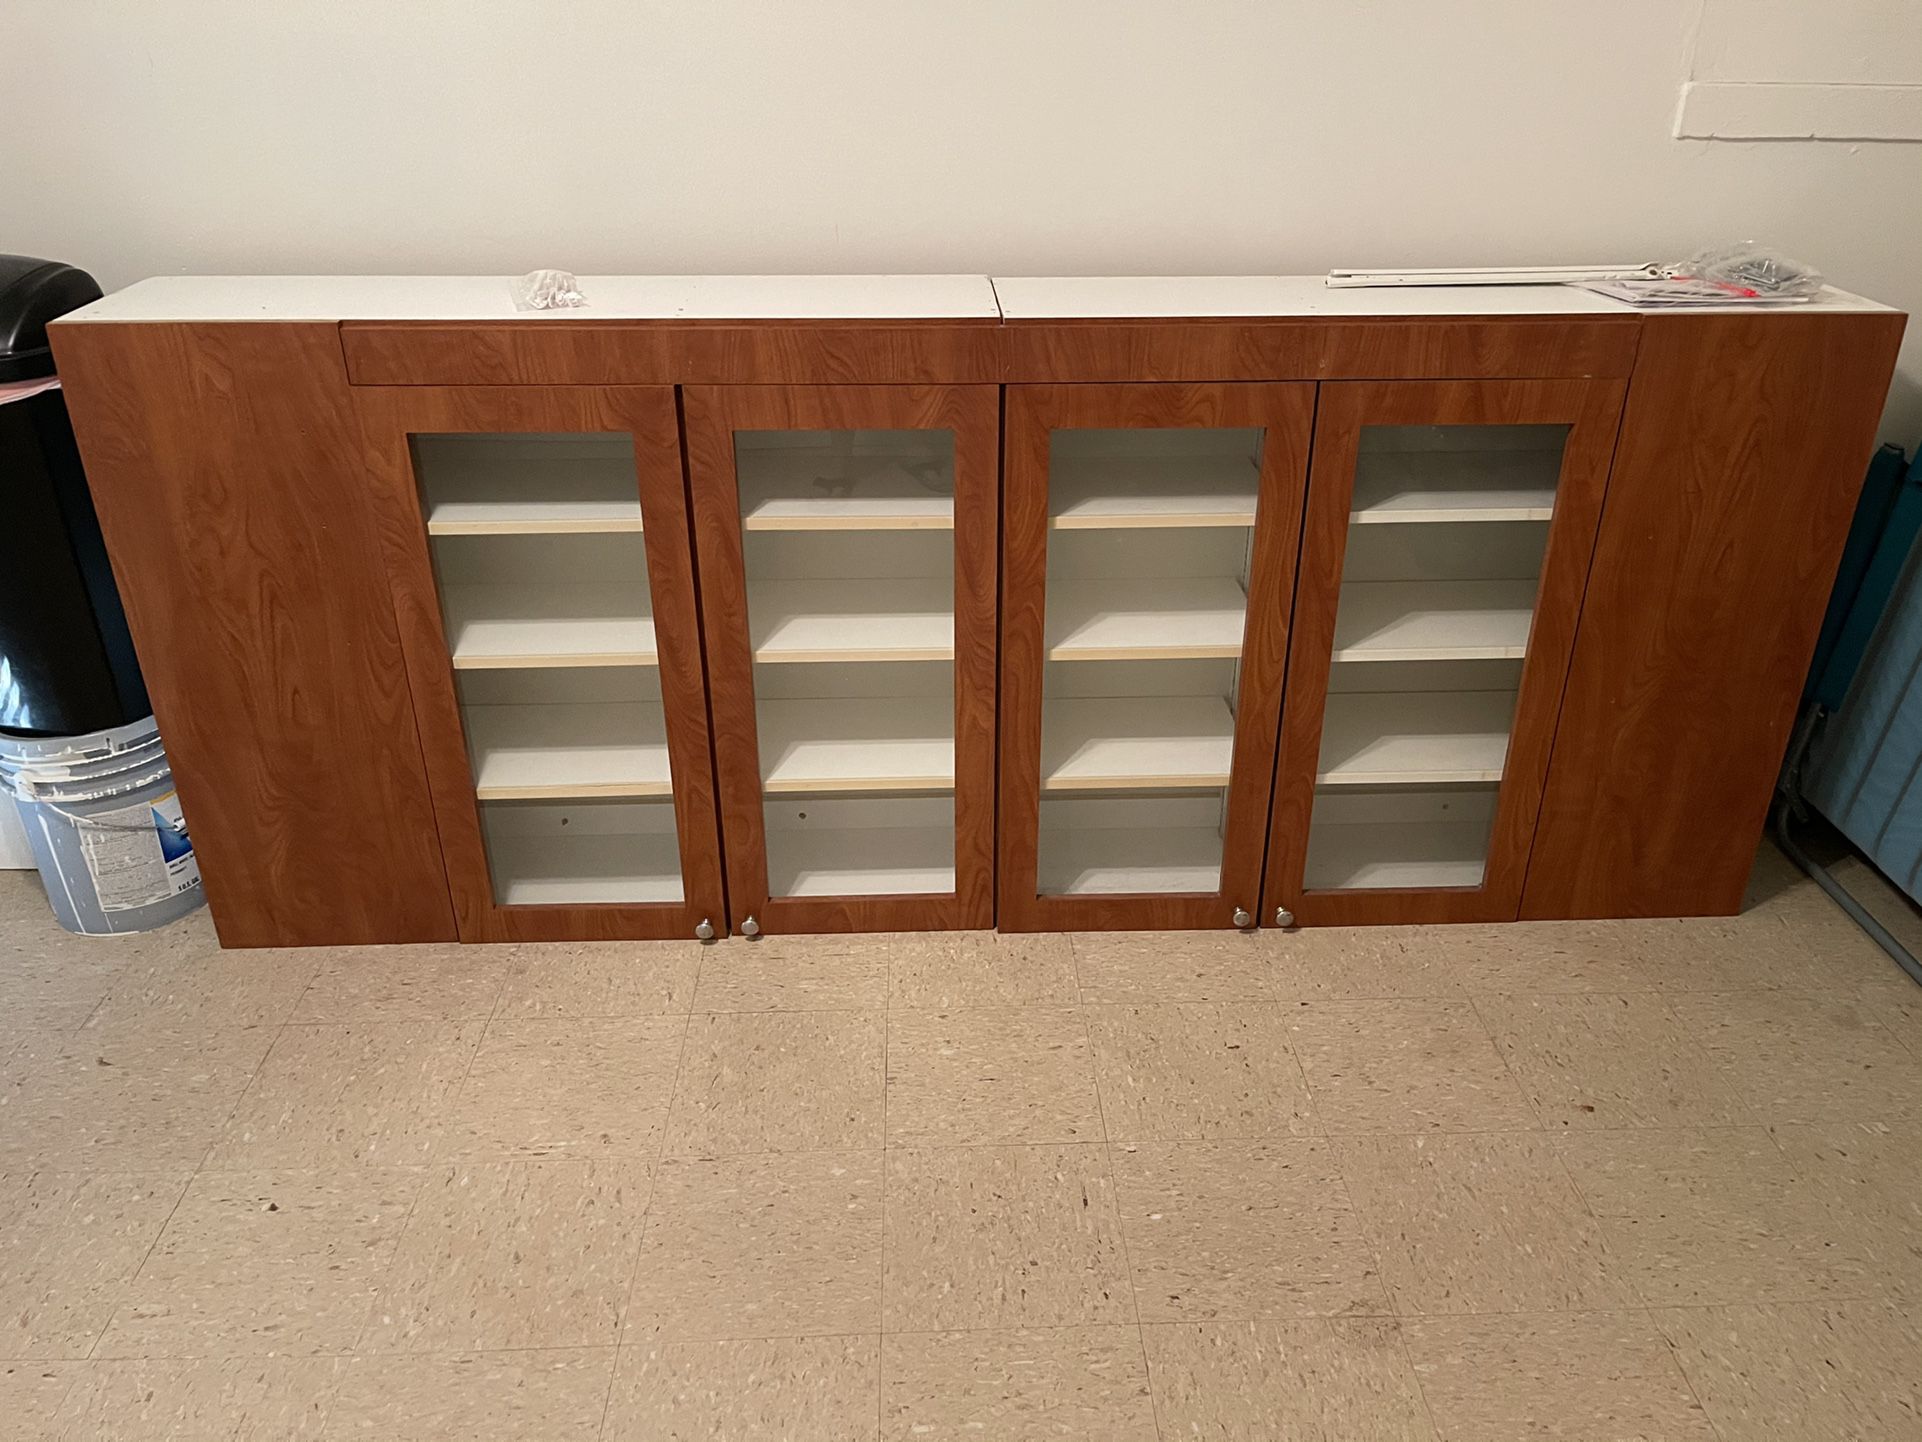 Length 50 ”Height 40” Width 12 5/8 ”wall kitchen cabinets with glass doors price $ 150 per piece I have two available that can be joined $ 300 for bot